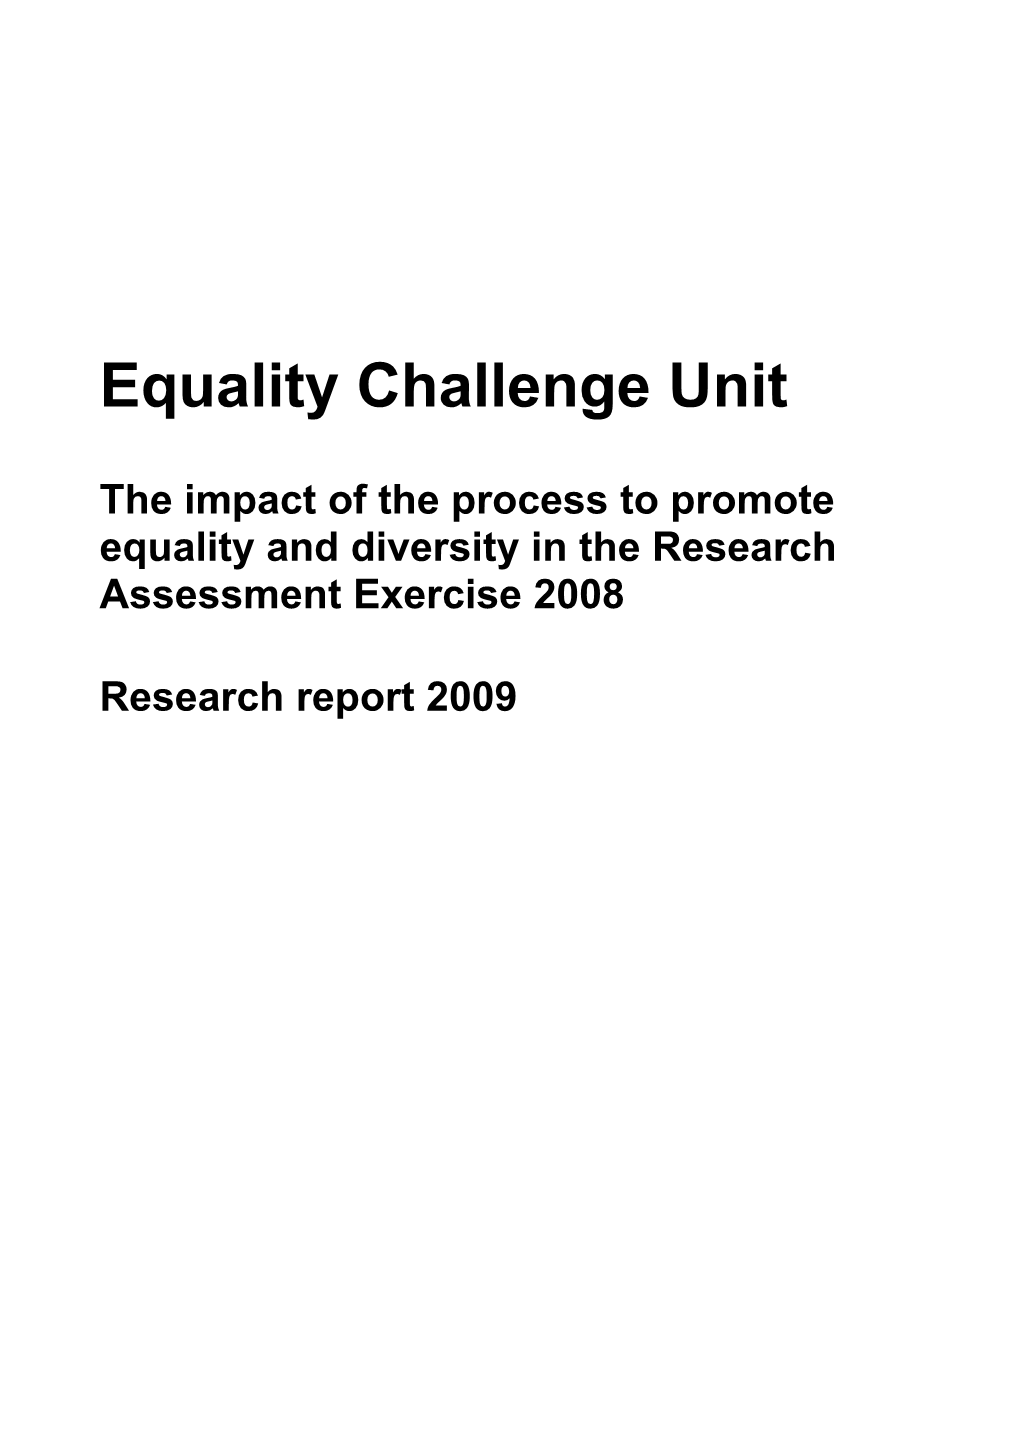 The Impact of the Process to Promote Equality and Diversity in the Research Assessment